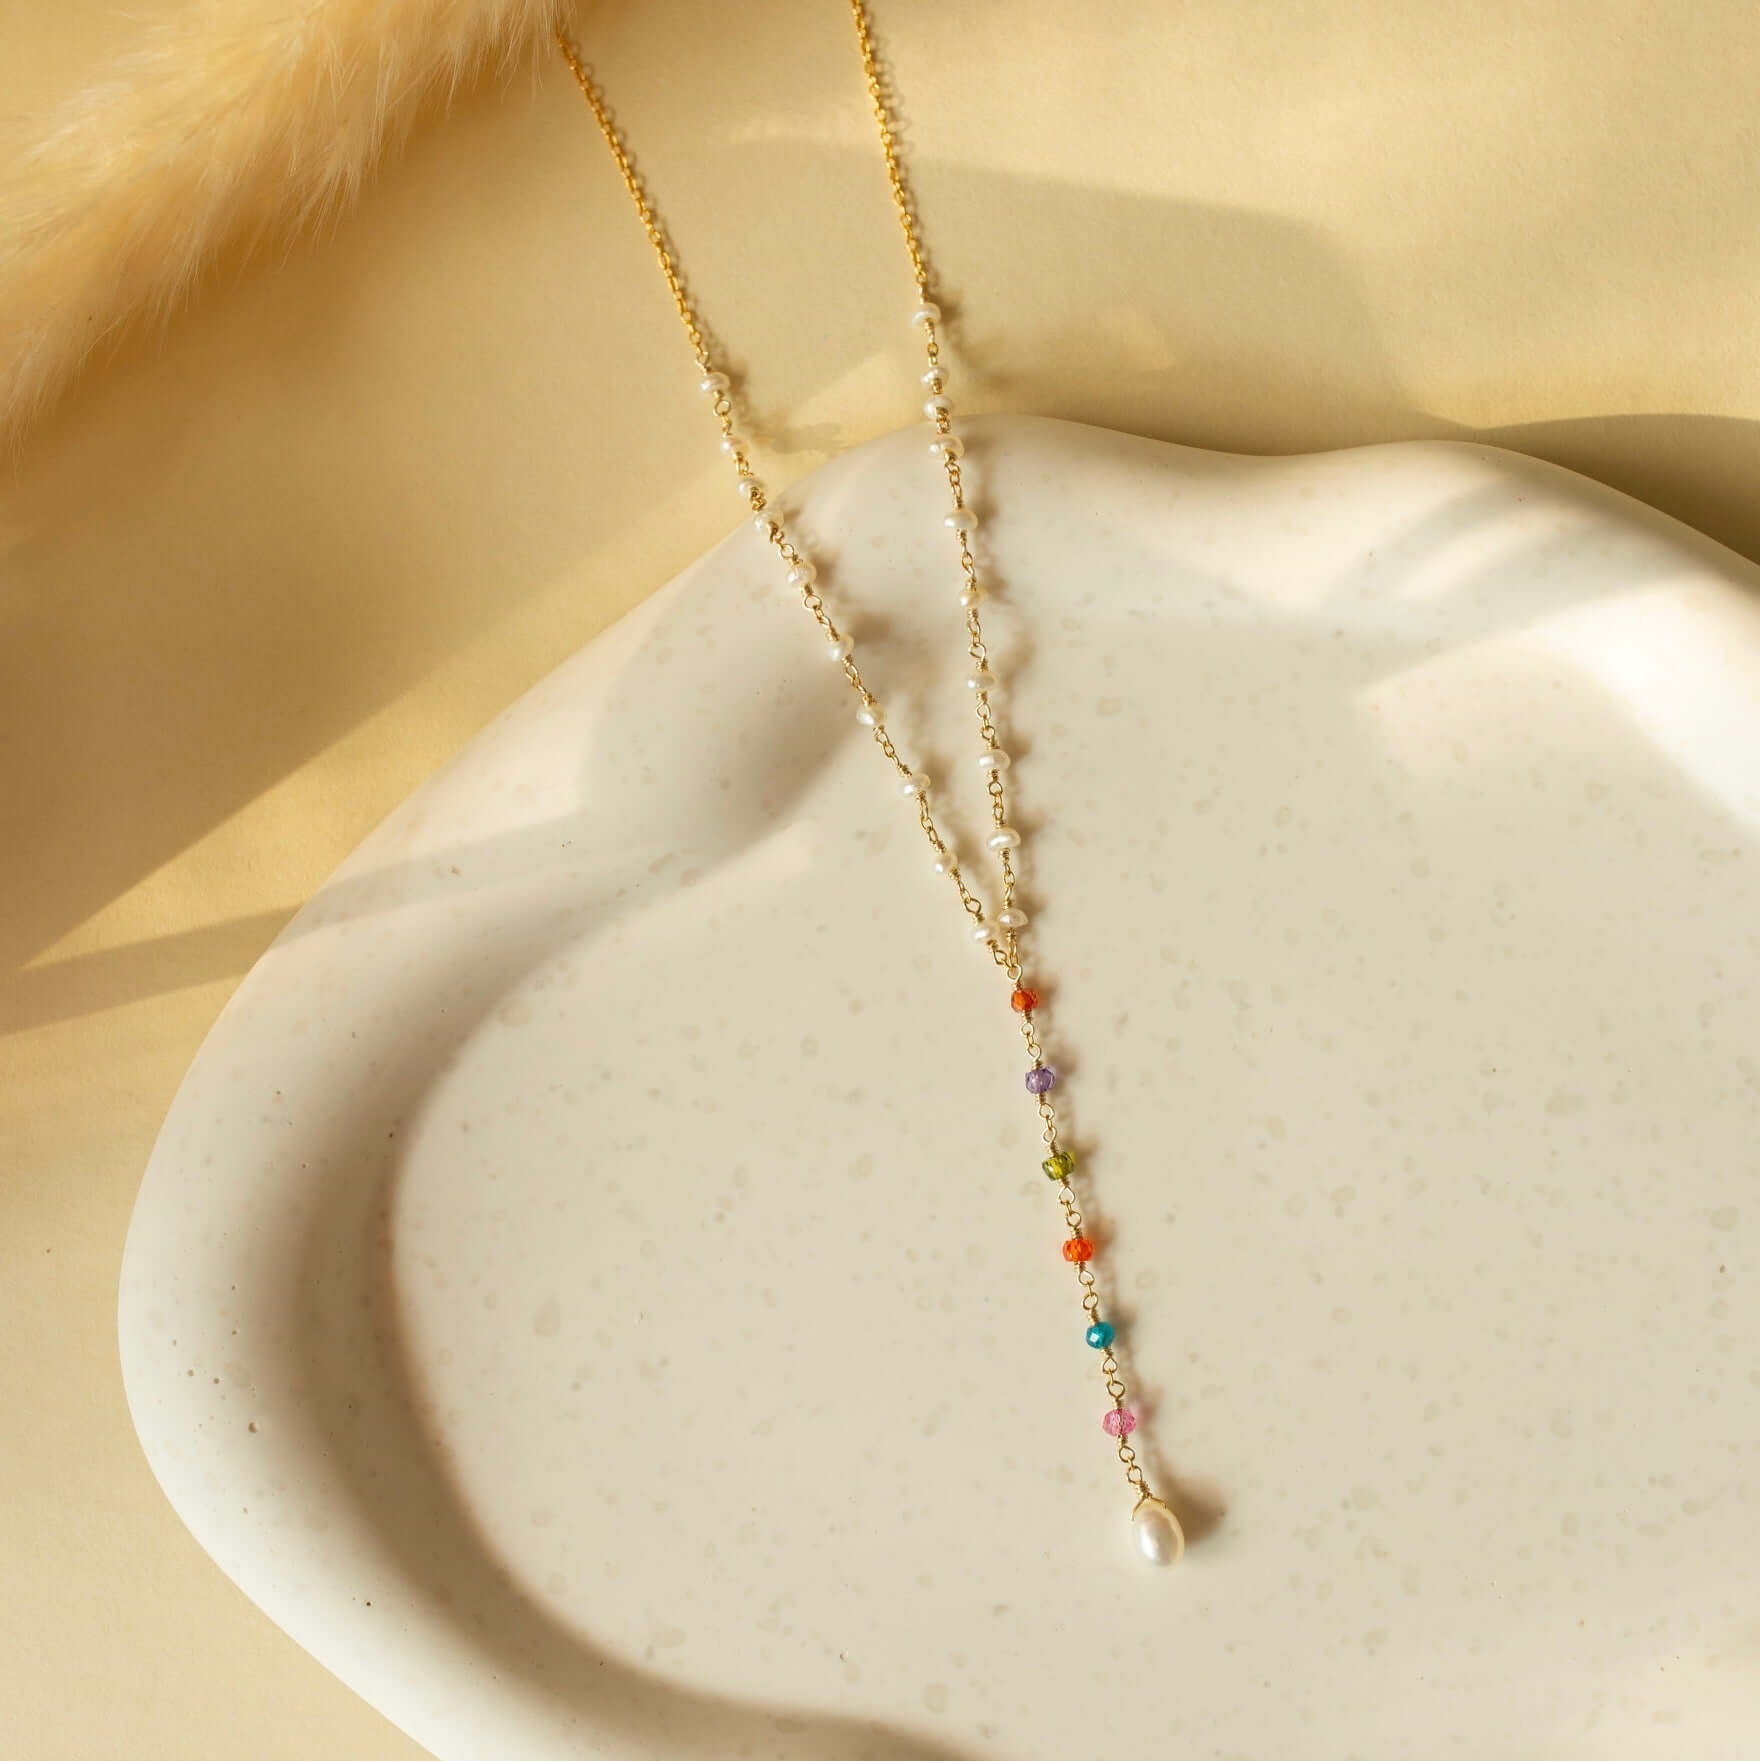 Delightful necklace with rainbow pearls on a clay plate.